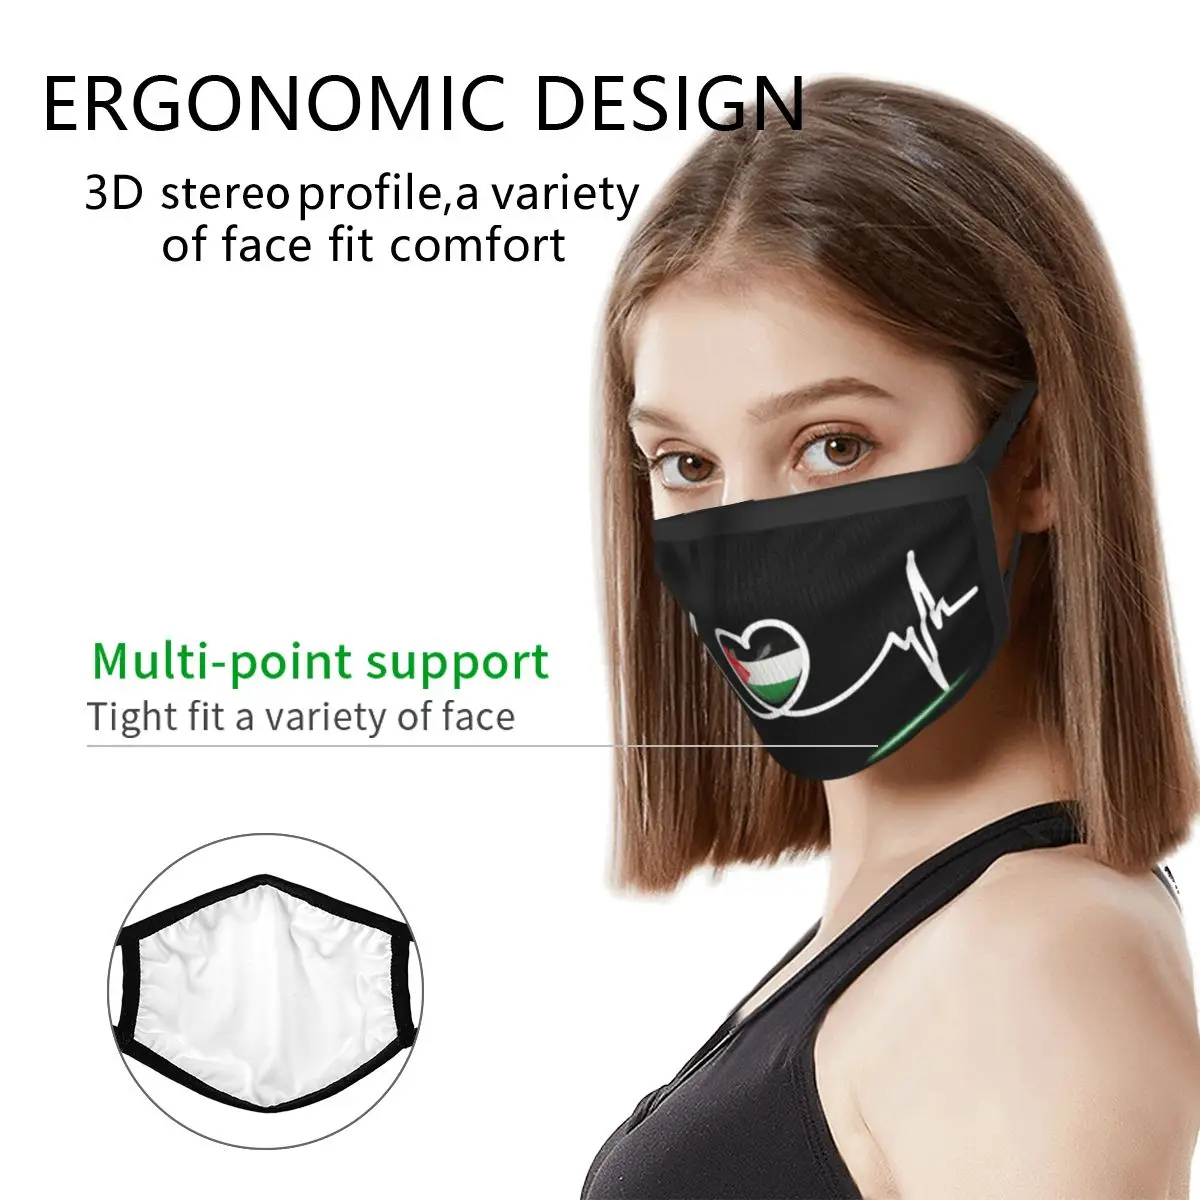 Heart Beat Palestine Palestinian Reusable Face Mask Anti Haze Dustproof Mask Protection Cover Respirator Mouth Muffle